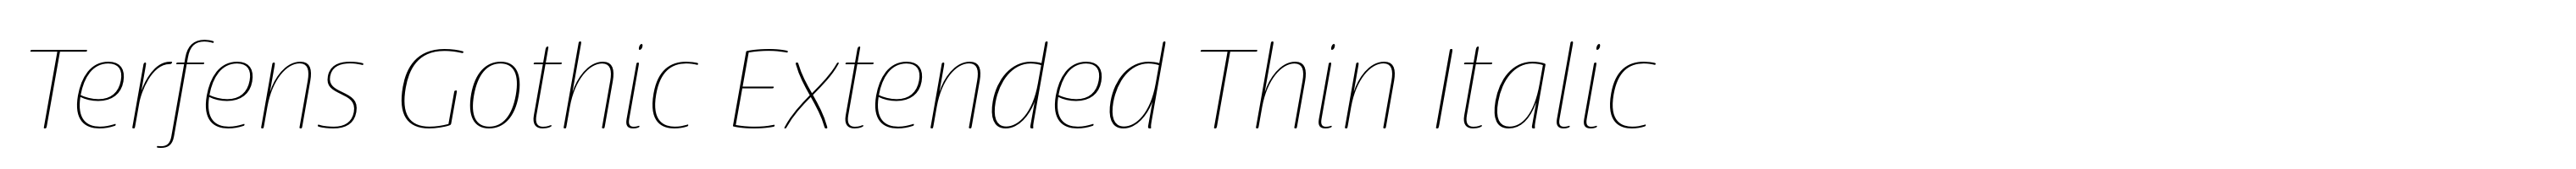 Terfens Gothic Extended Thin Italic